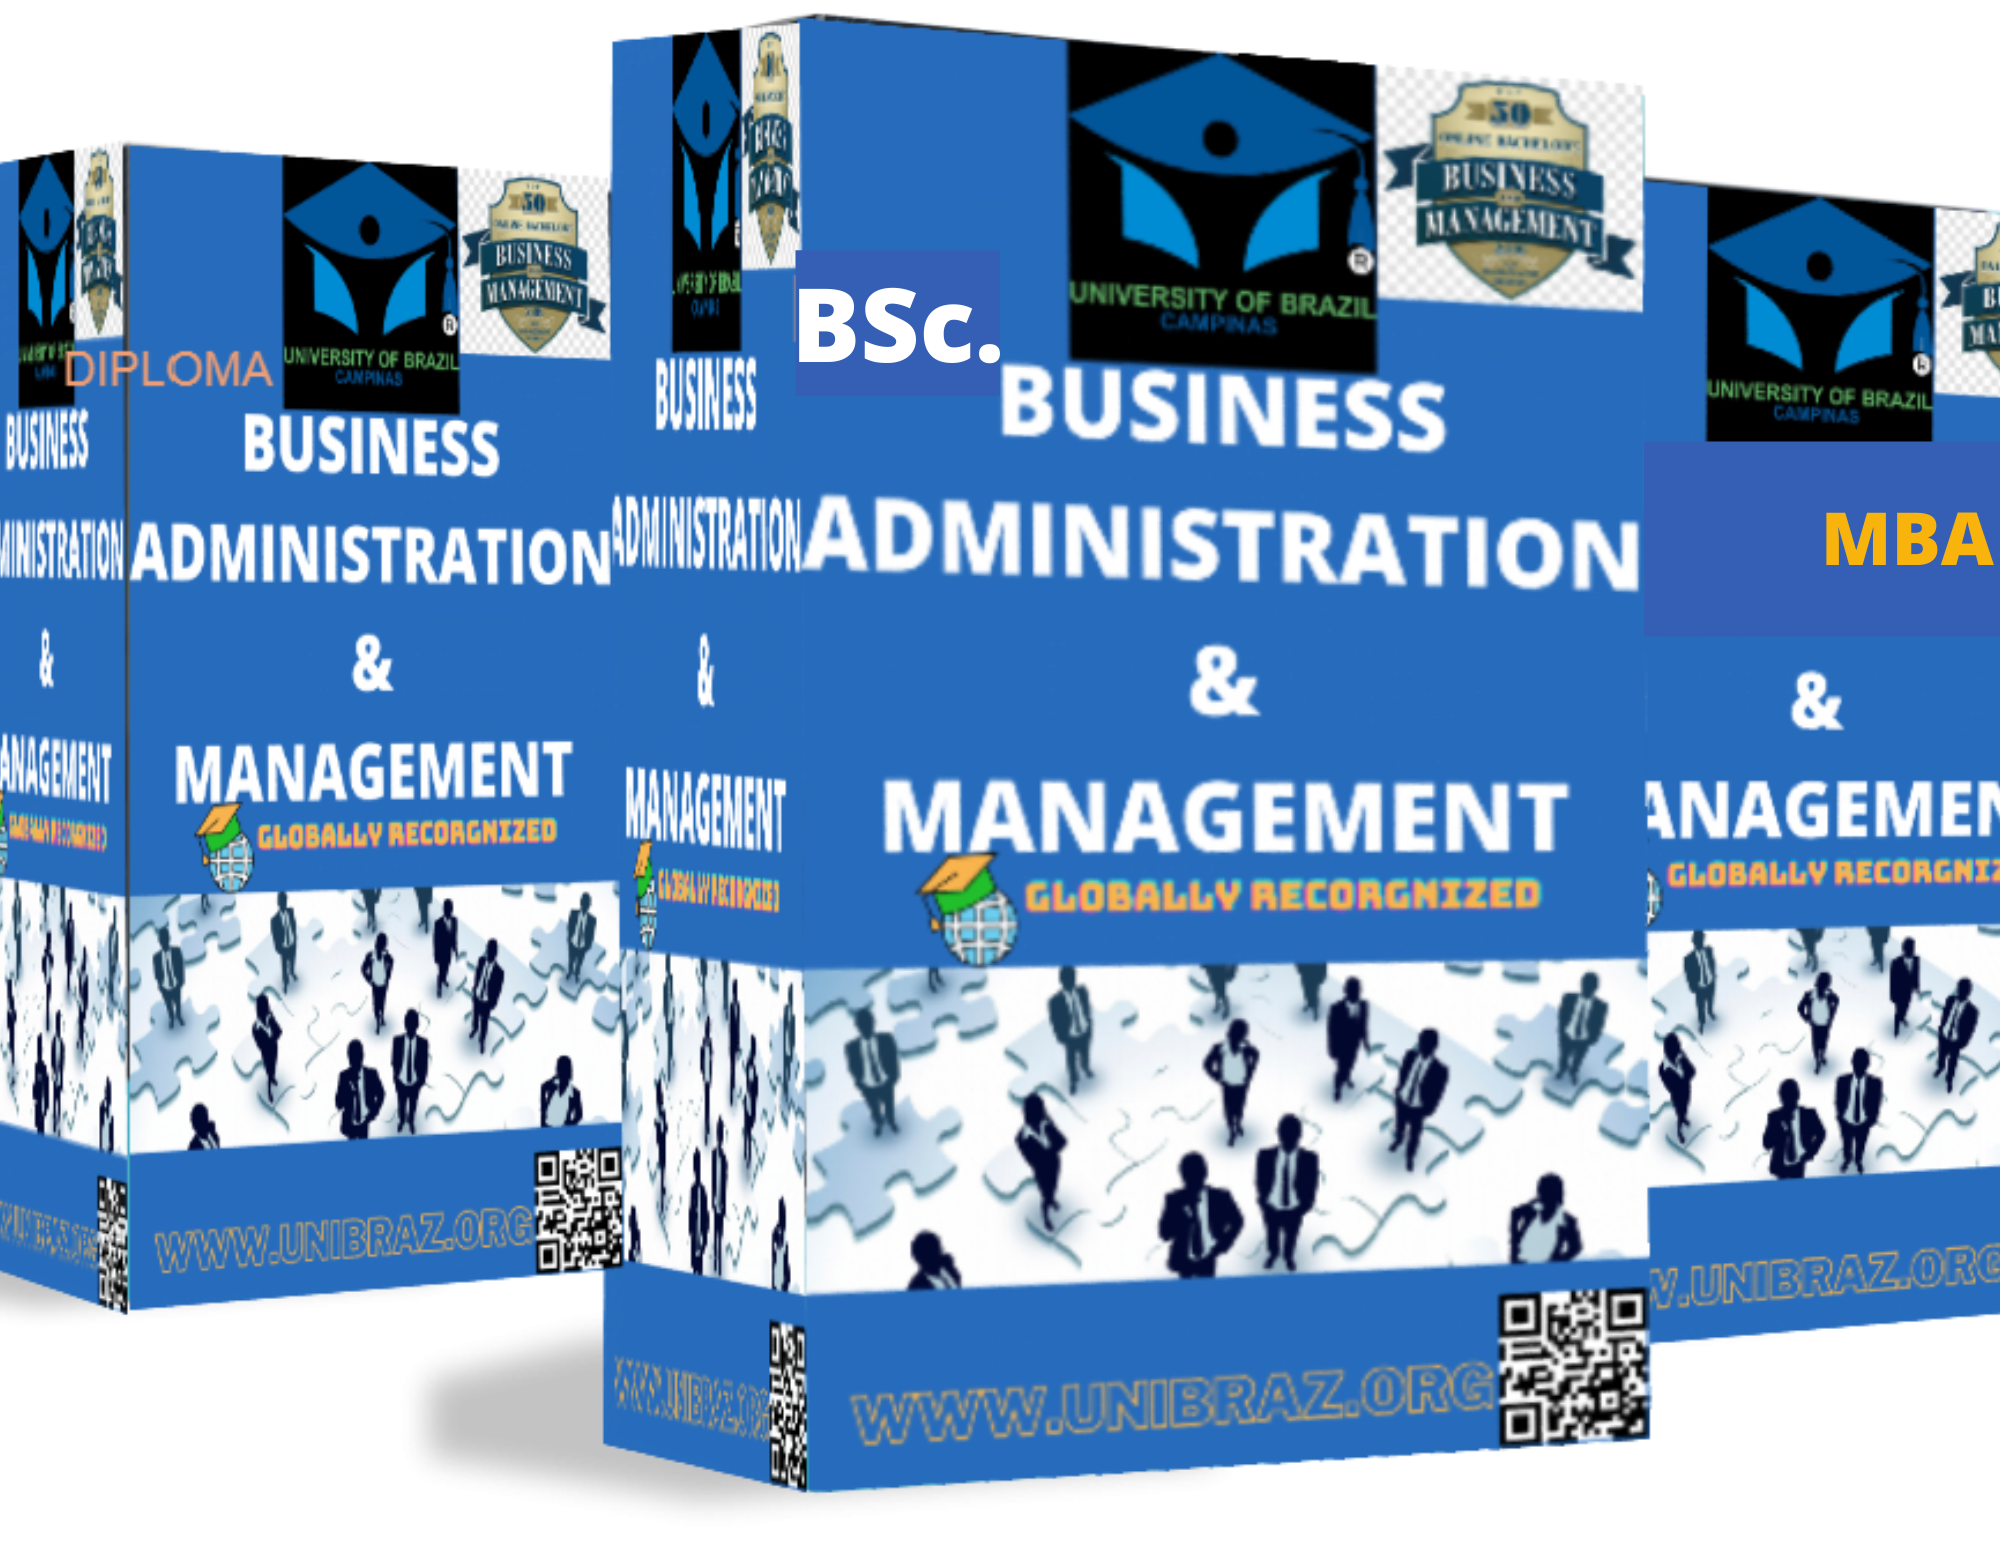 BACHELOR OF SCIENCE (BSc.) BUSINESS ADMINISTRATION AND MANAGEMENT